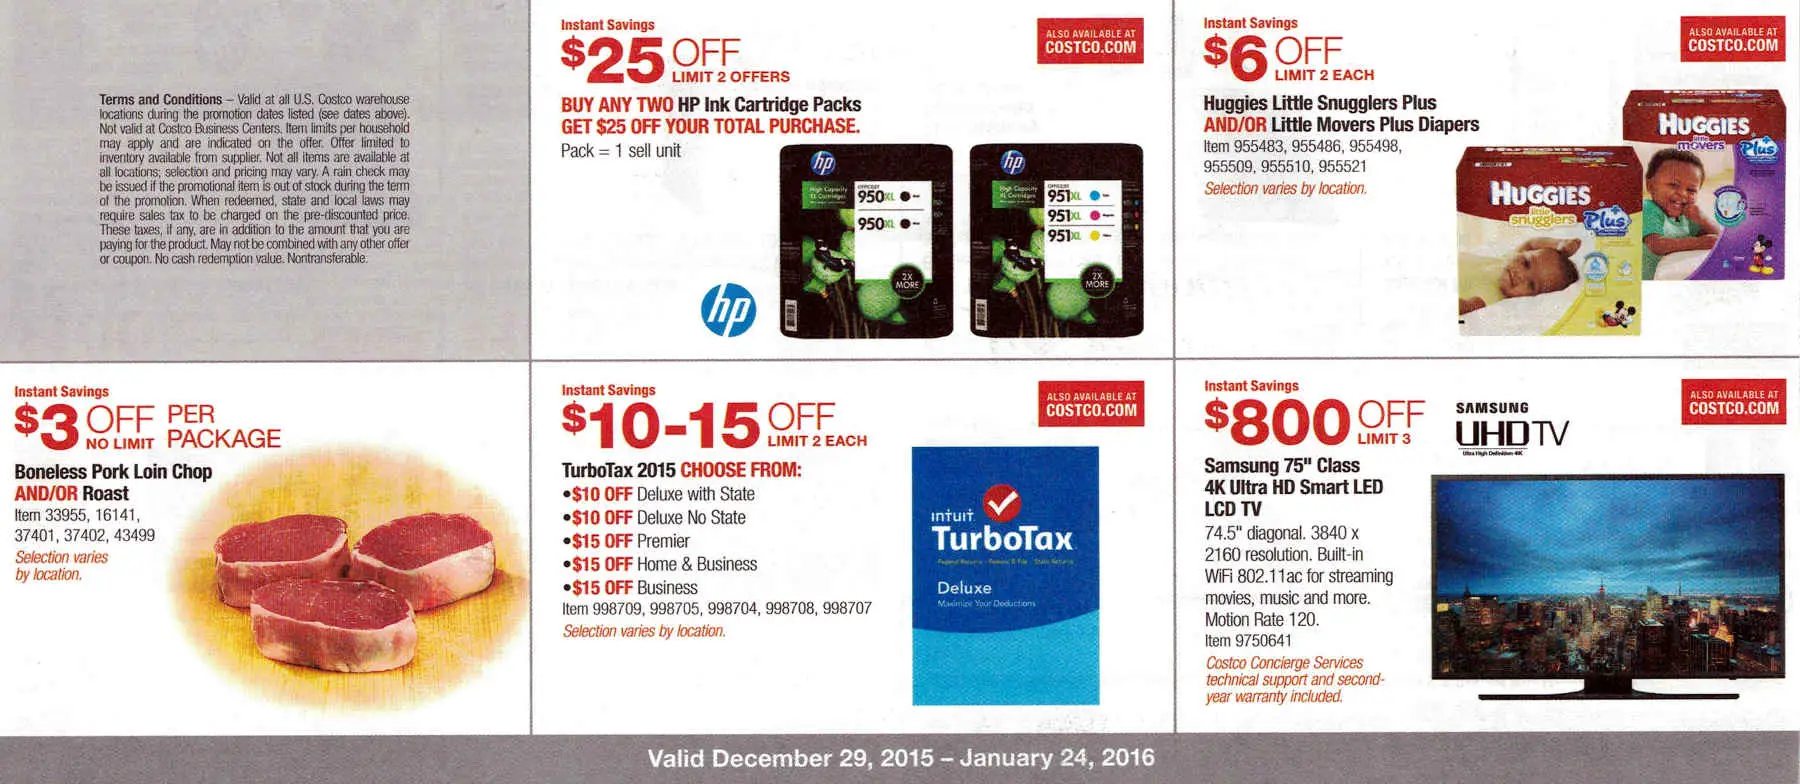 january-2016-costco-coupon-book-page-1-costco-insider